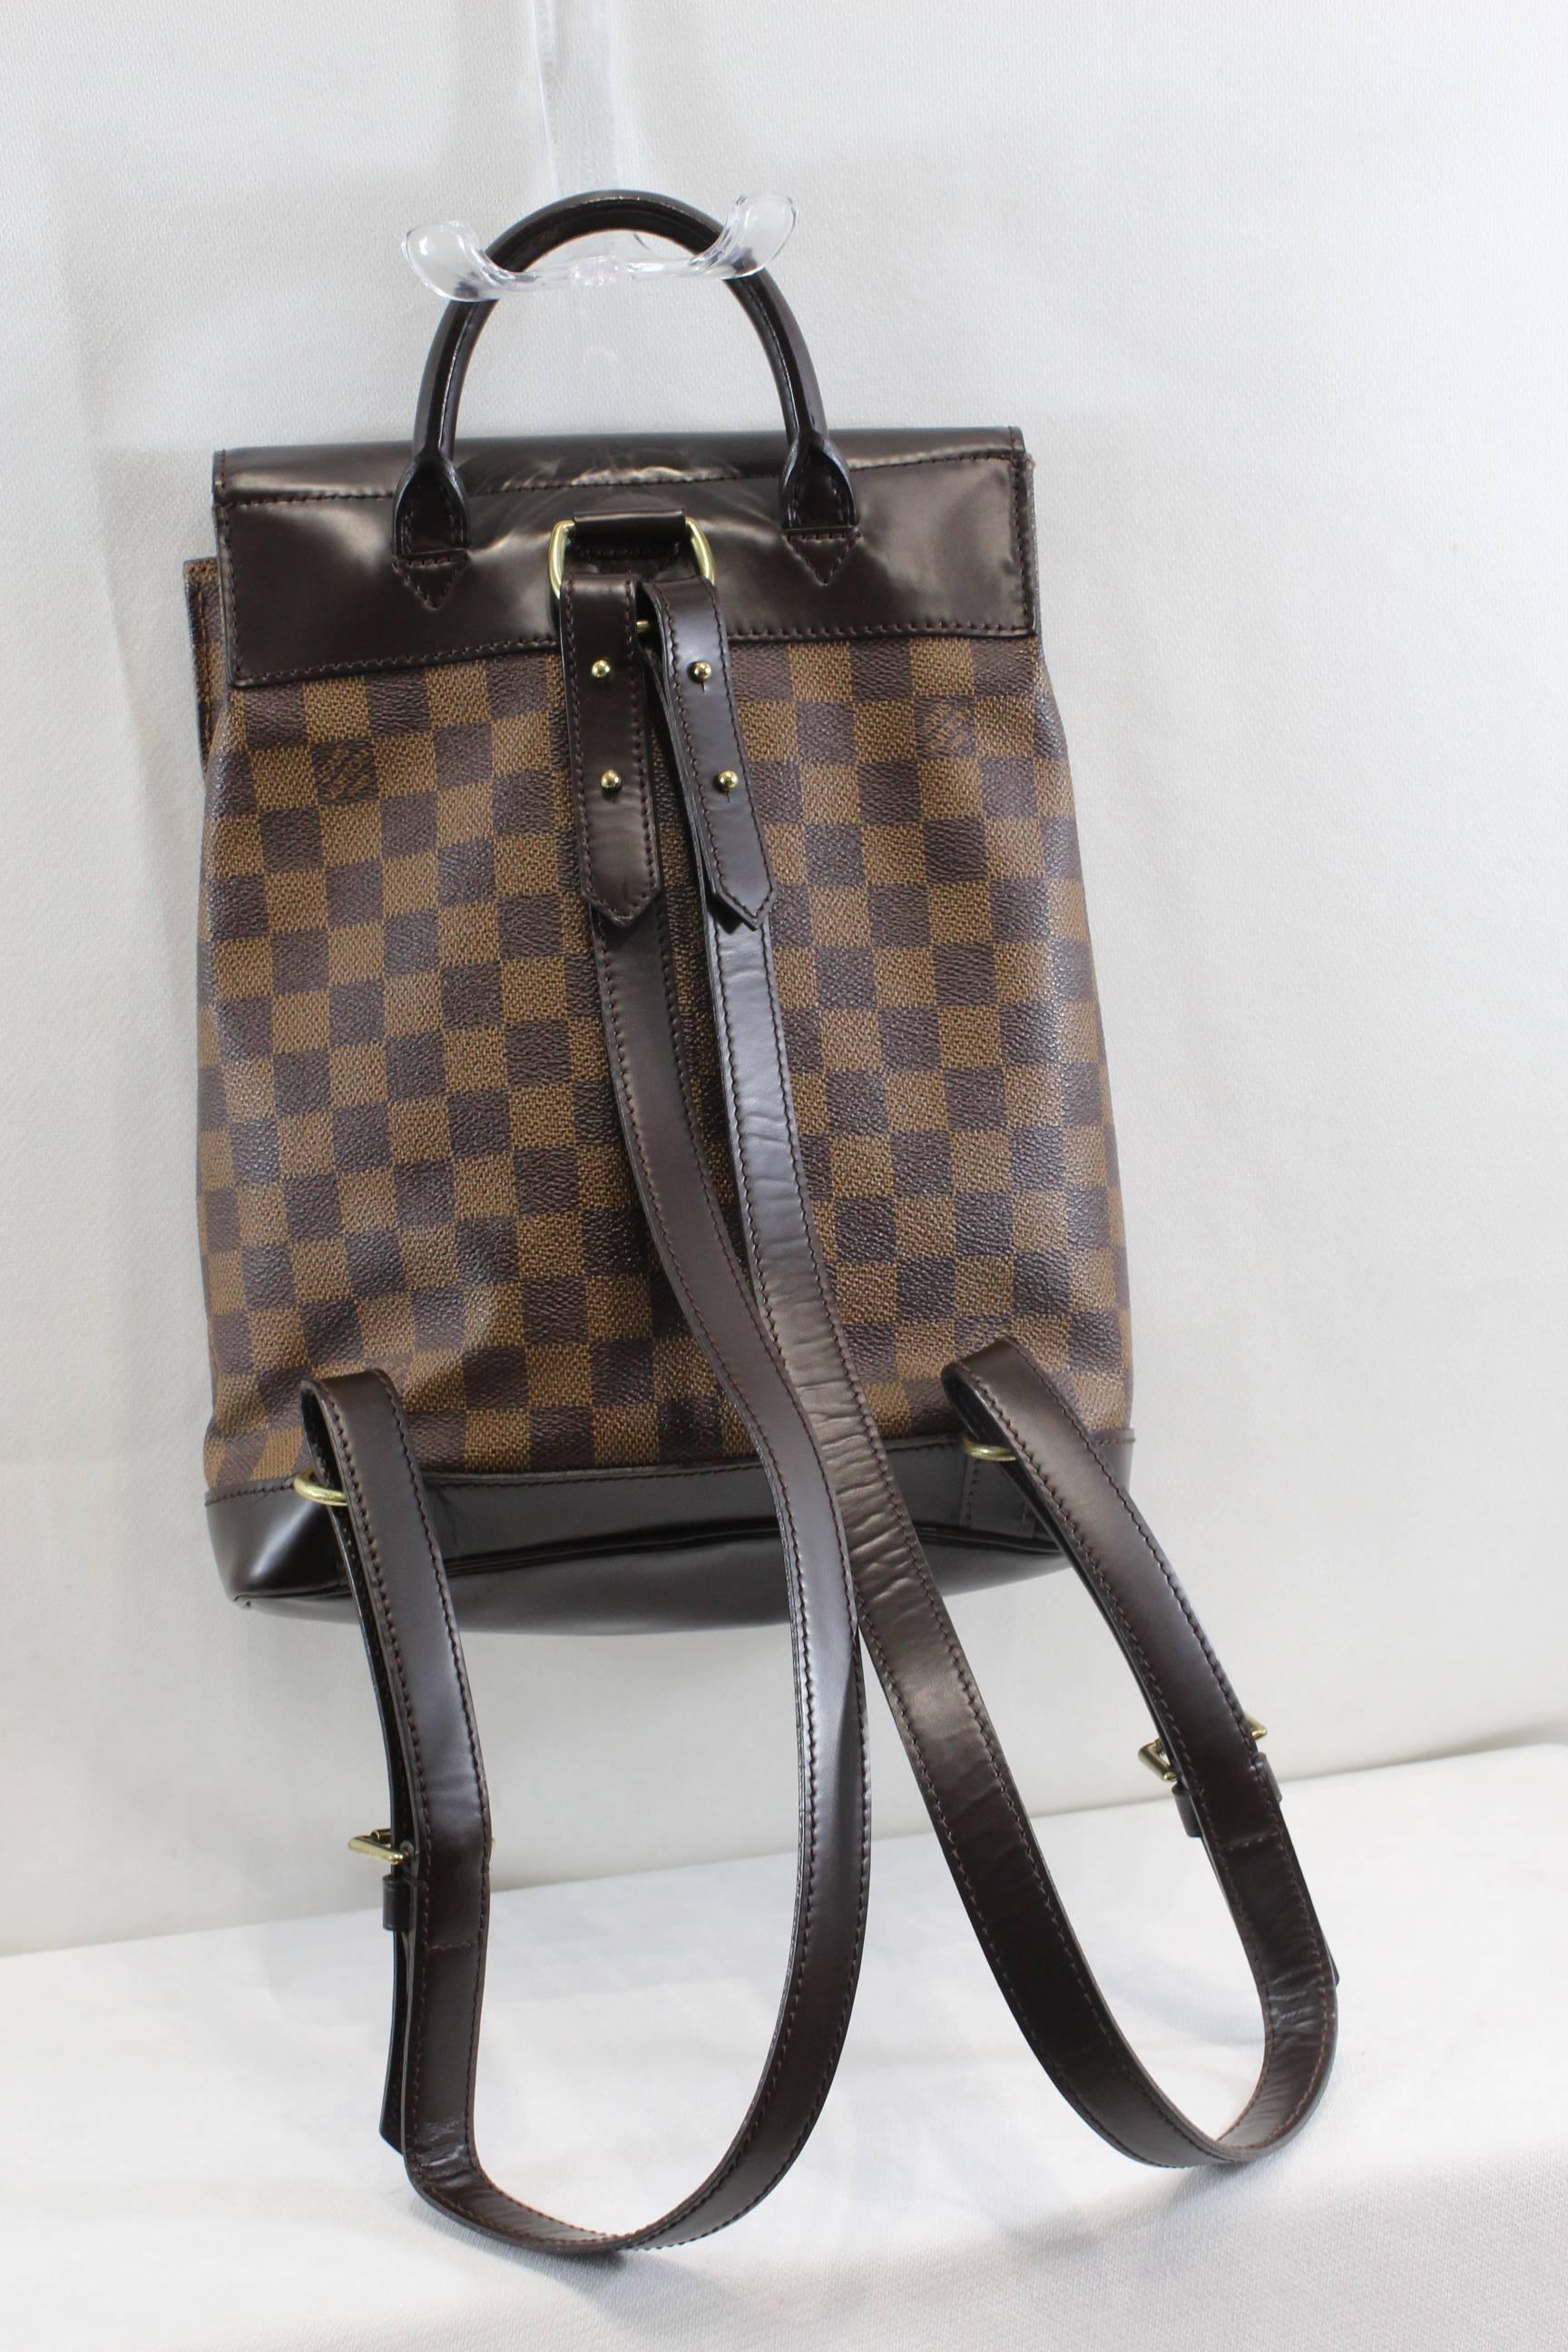 Really ncie Louis Vuitton Soho Backpck in damier ebene and brown leather.

Really good conditoon.

from 1999

11x9